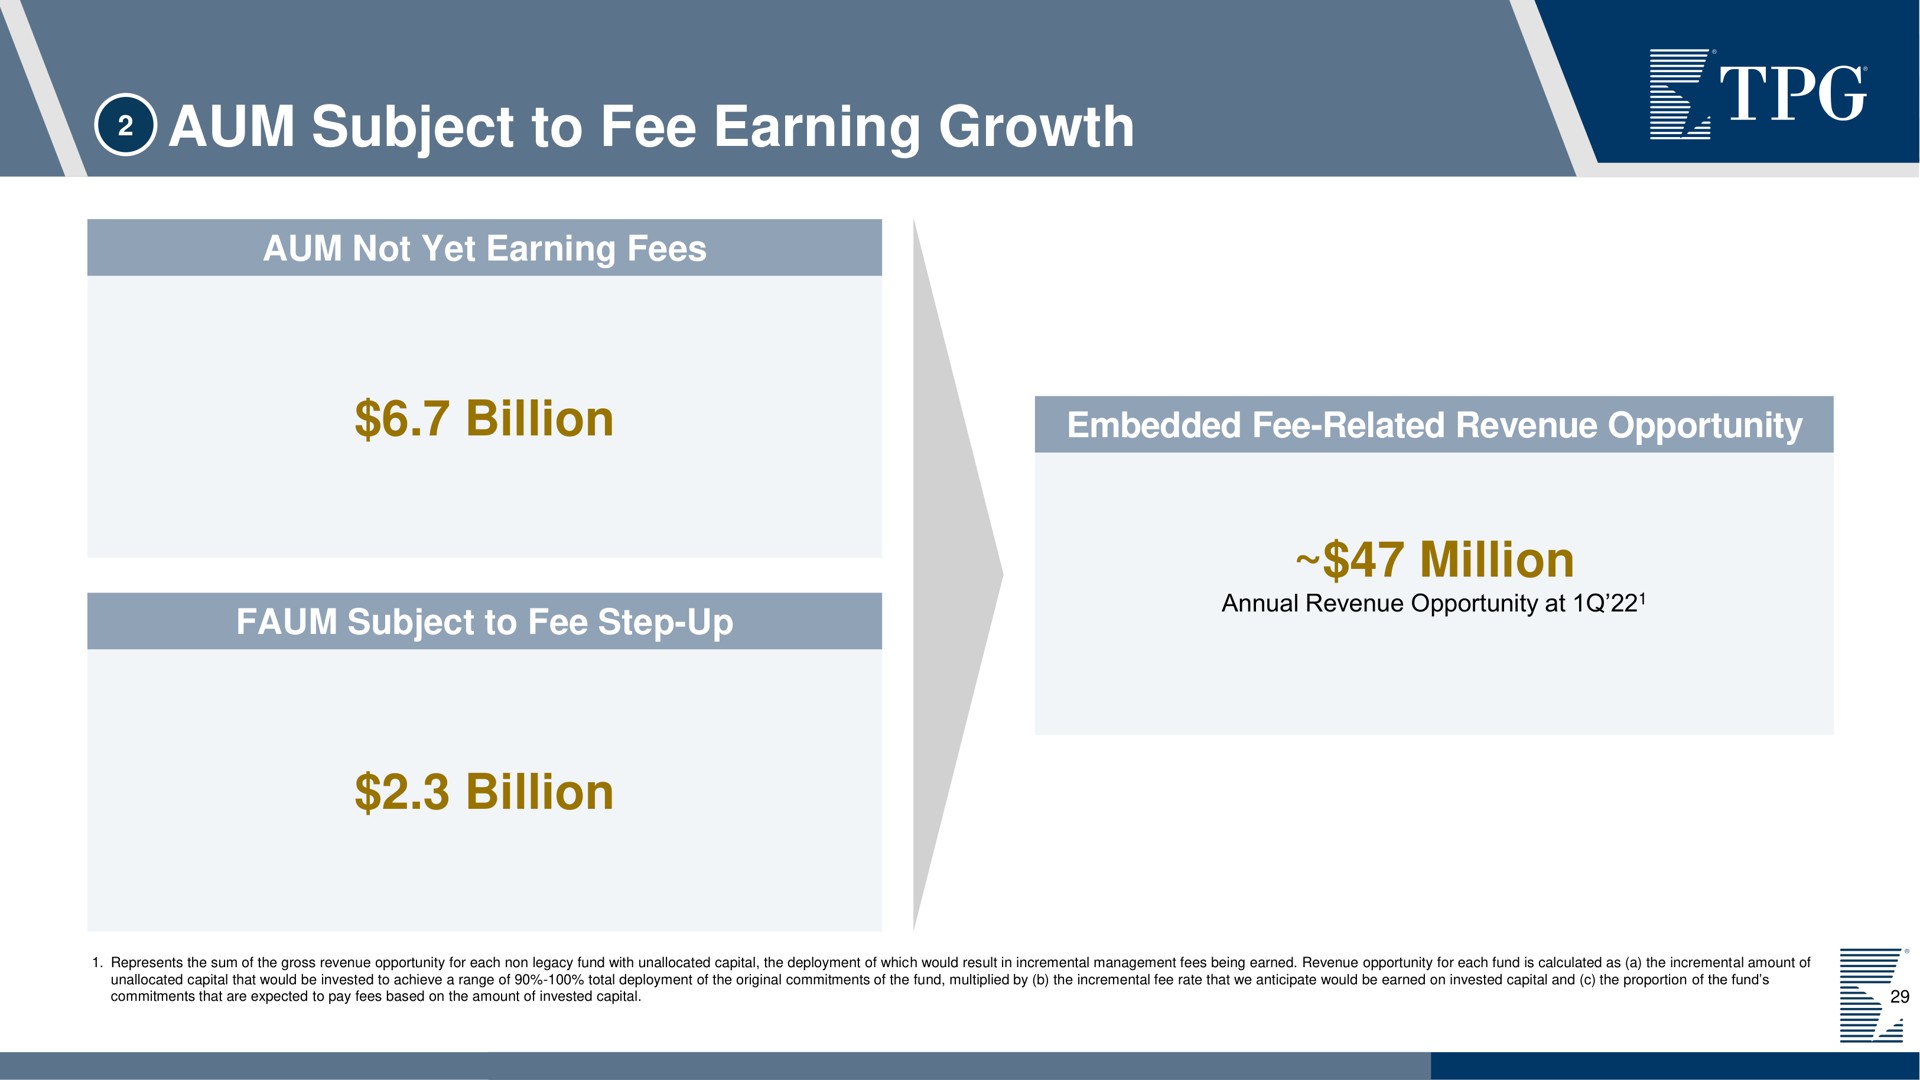 aum subject to fee earning growth | TPG